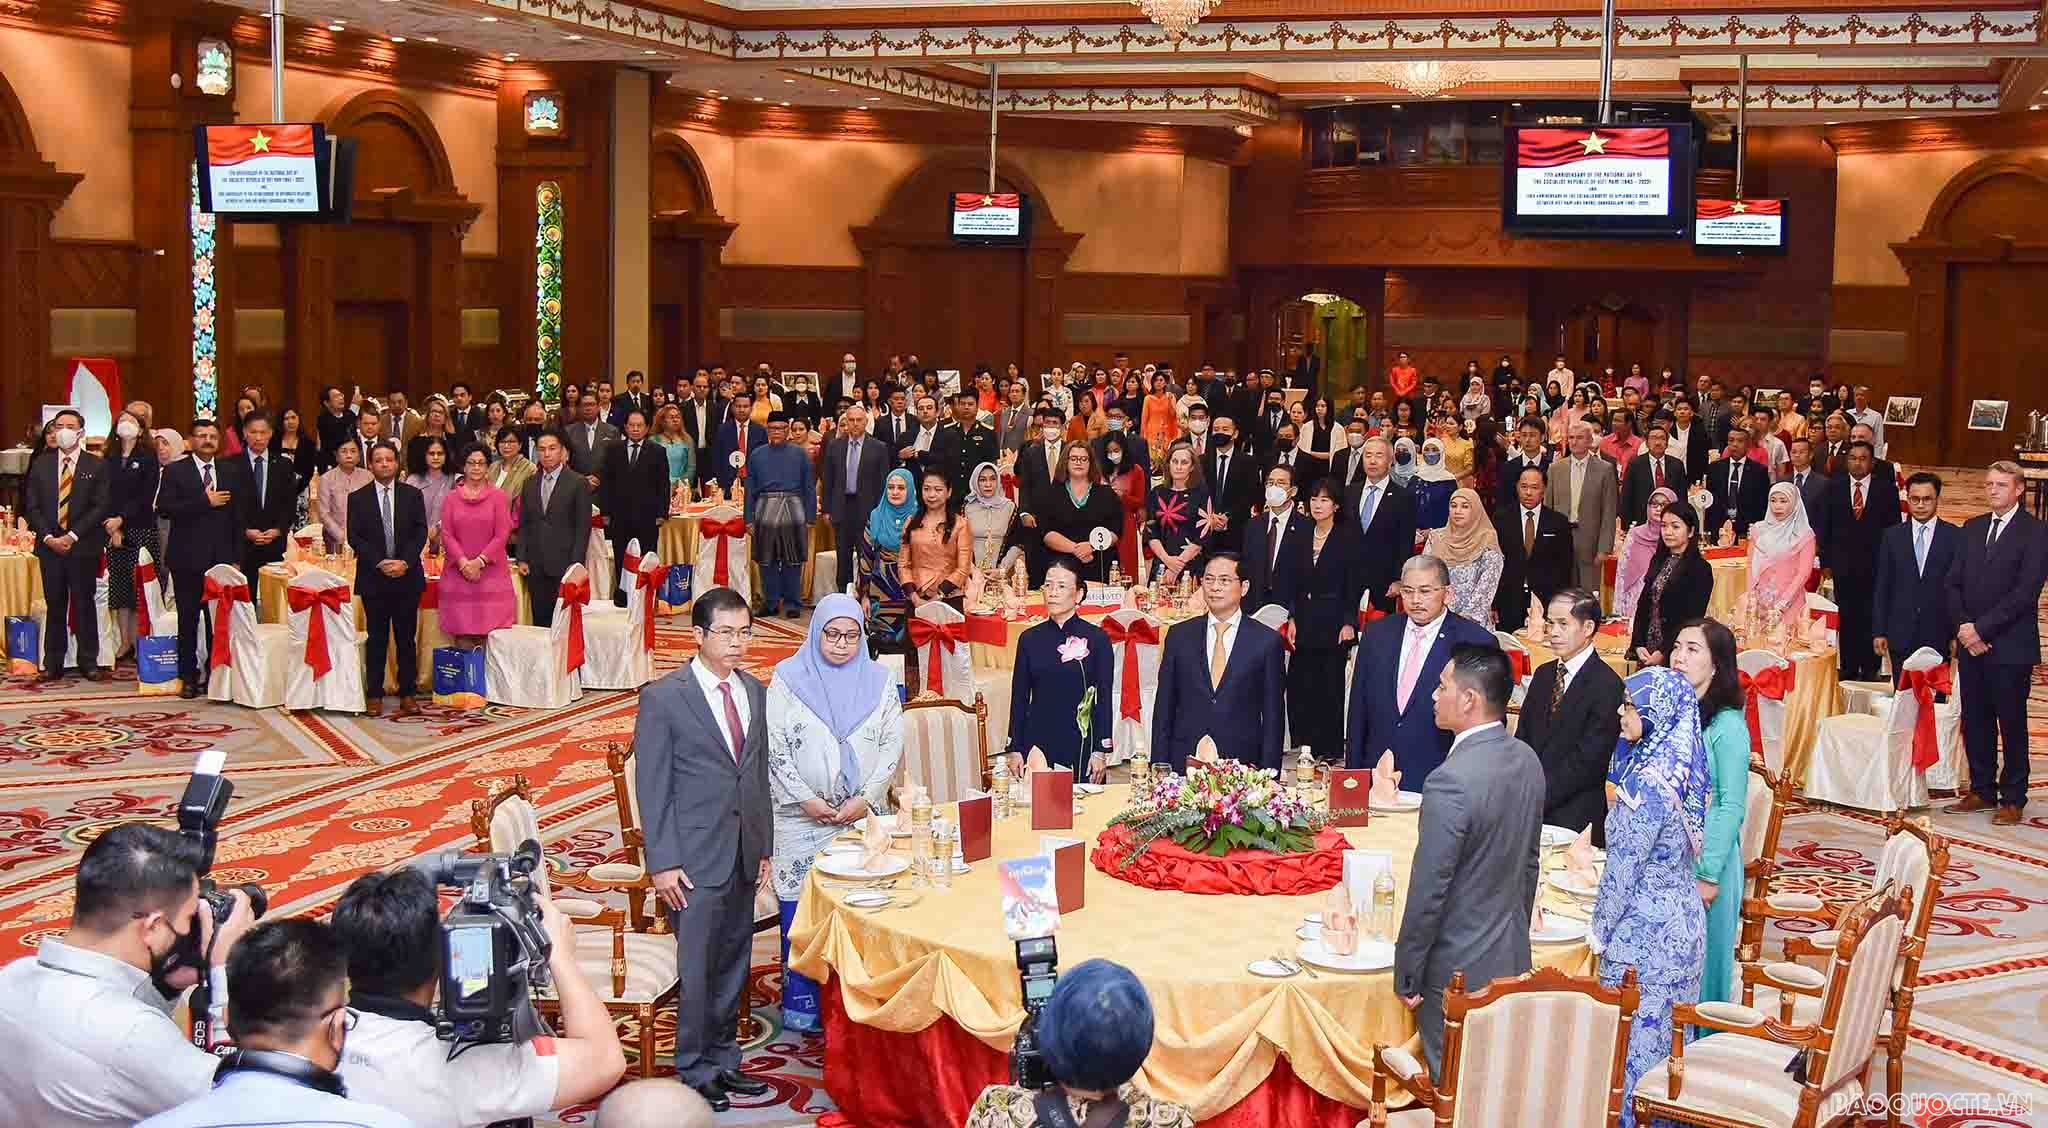 Foreign Minister Bui Thanh Son attended celebration of Vietnam National Day in Brunei